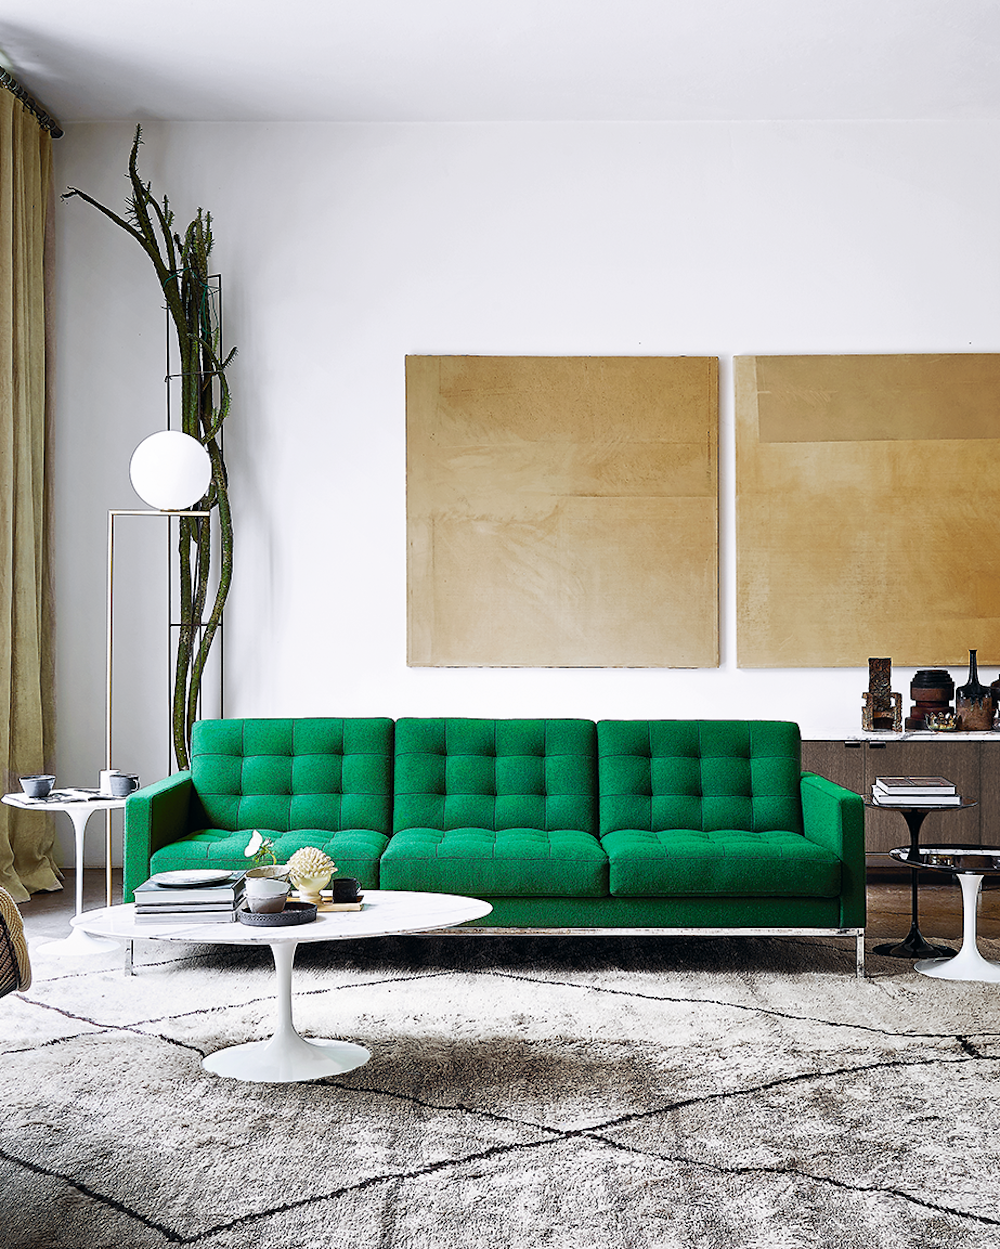 Saarinen Side and Coffee Tables, Florence Knoll Sofa and Credenza